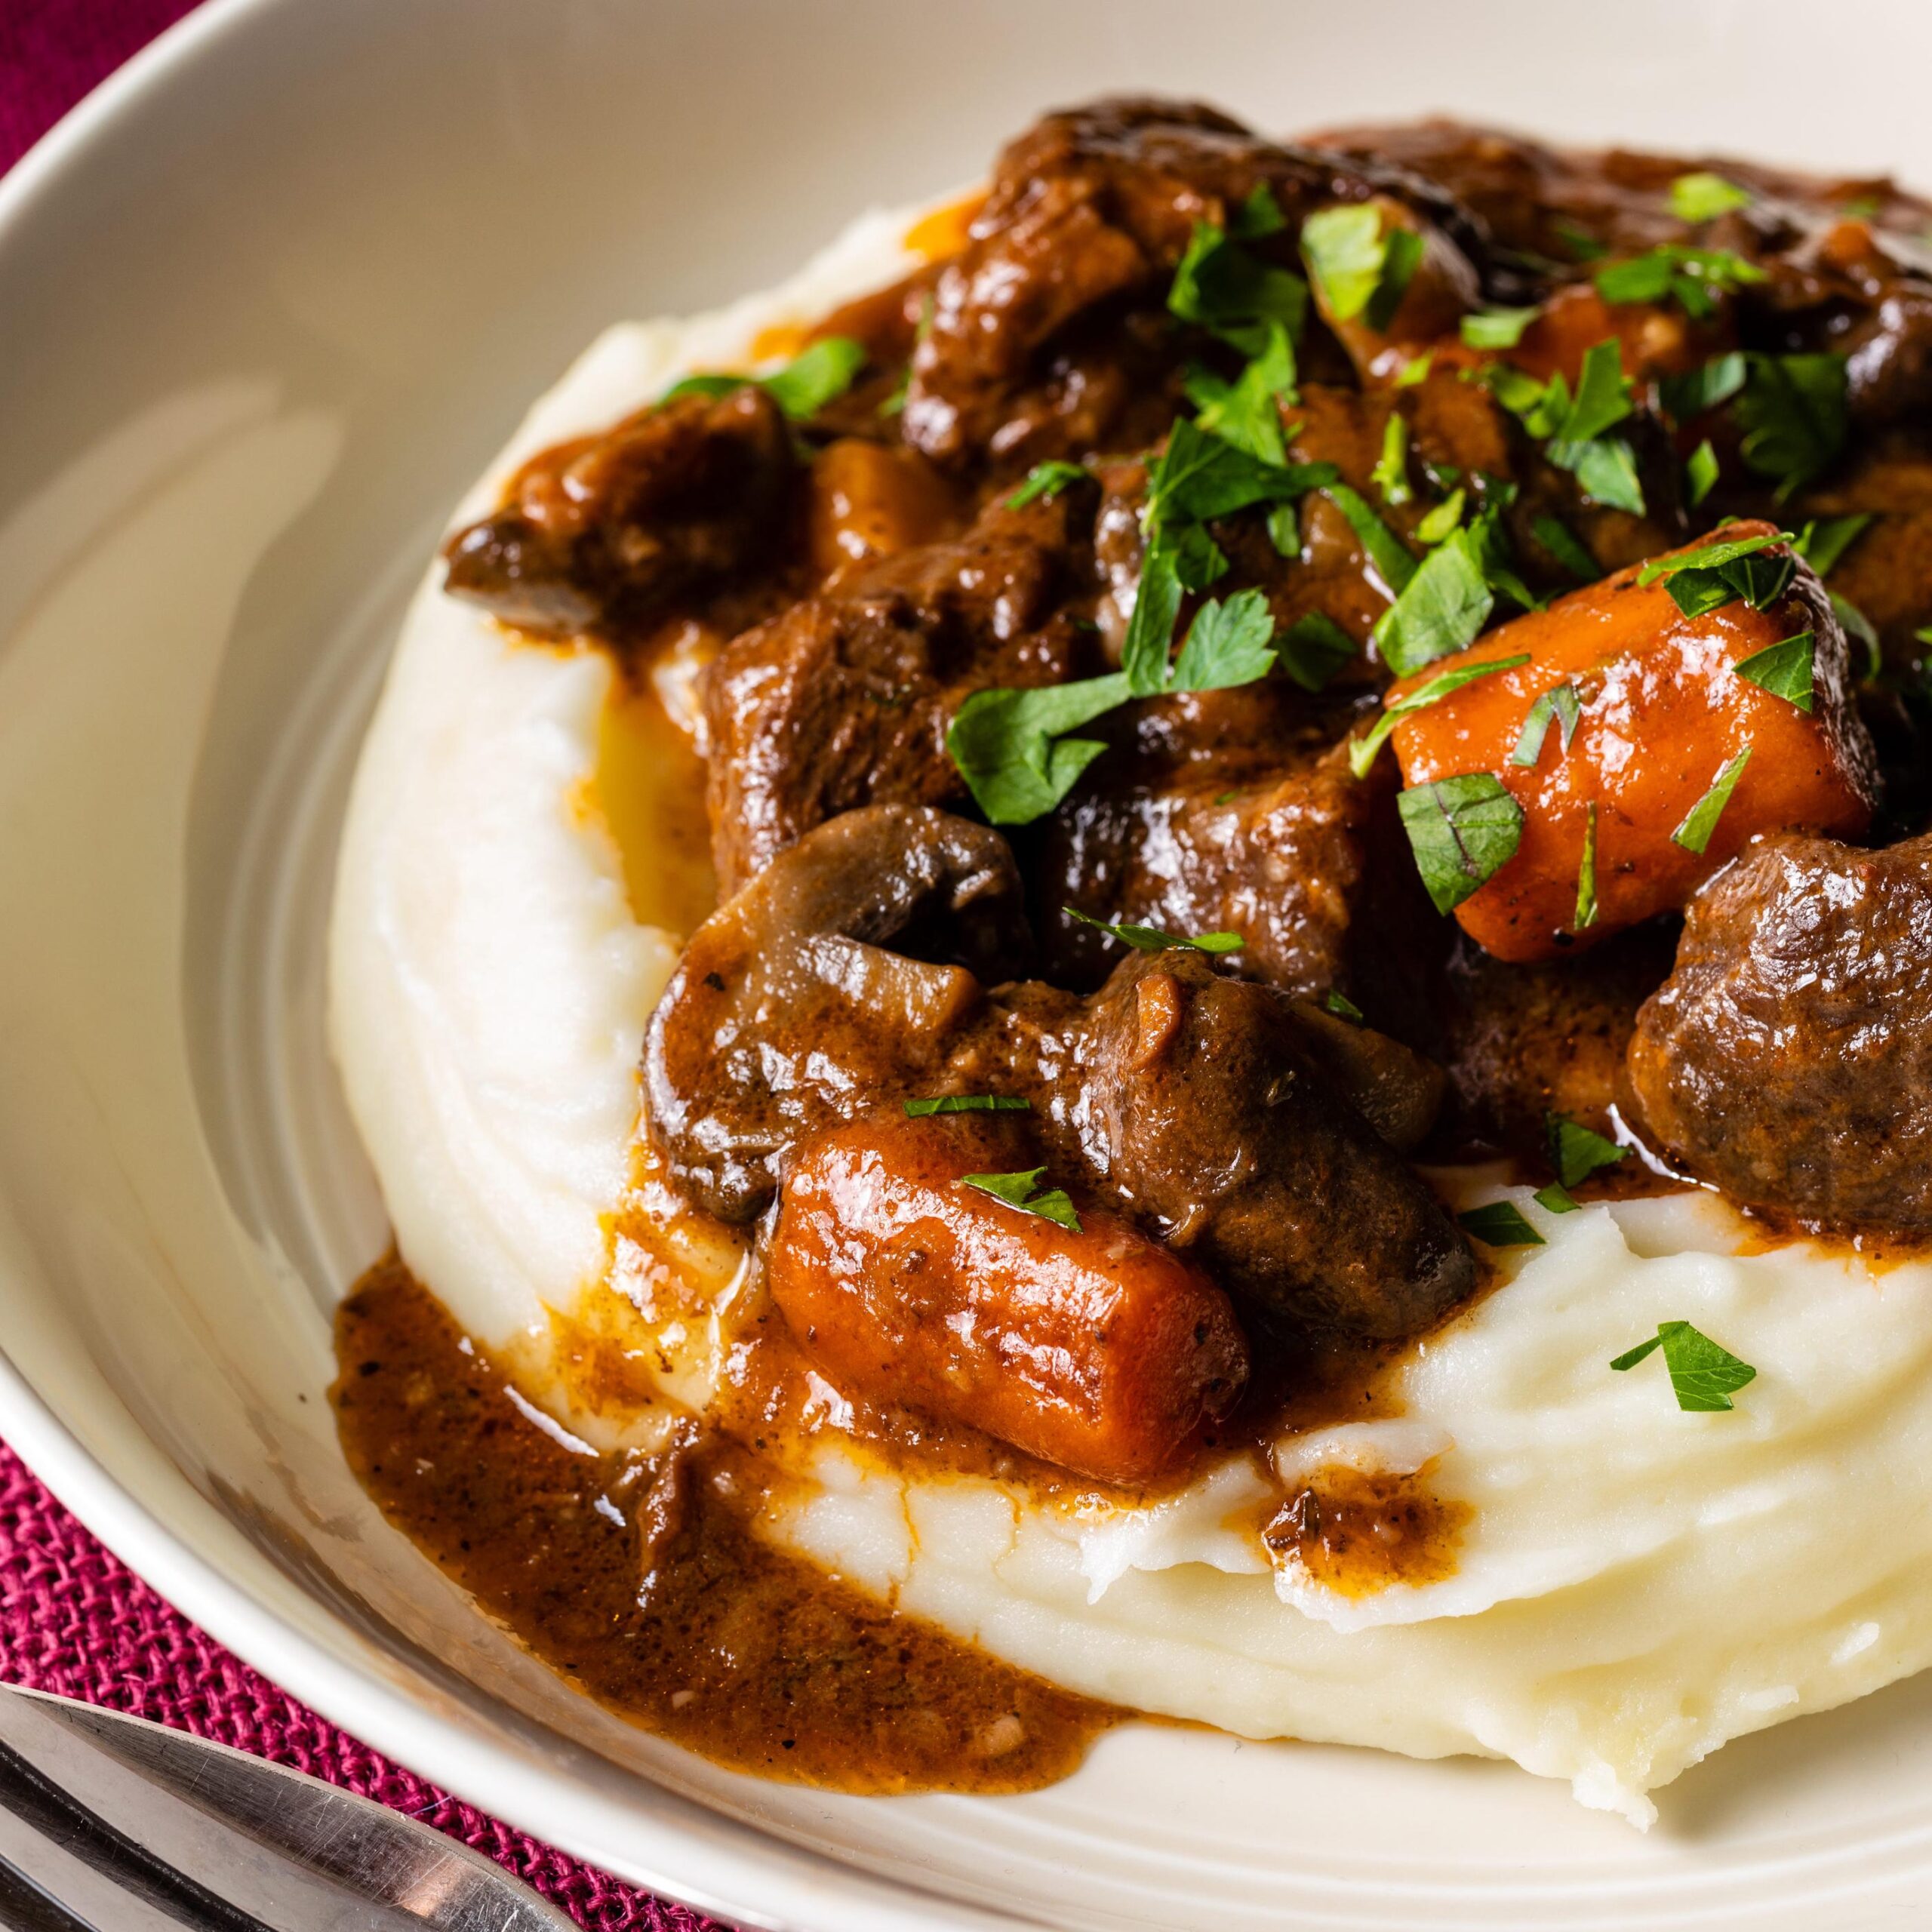  Tender chunks of beef are slowly simmered in a red wine and beef broth for hours.